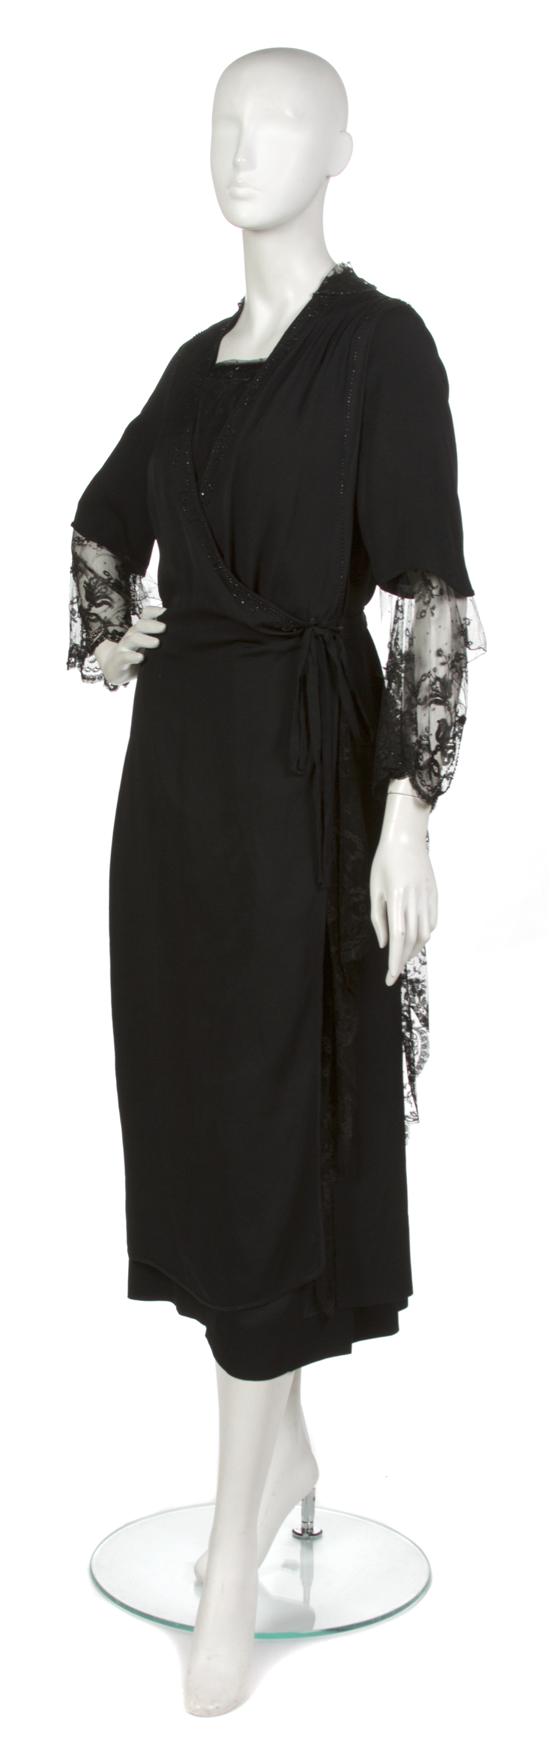 A Black Silk and Lace Dress probably 155a07